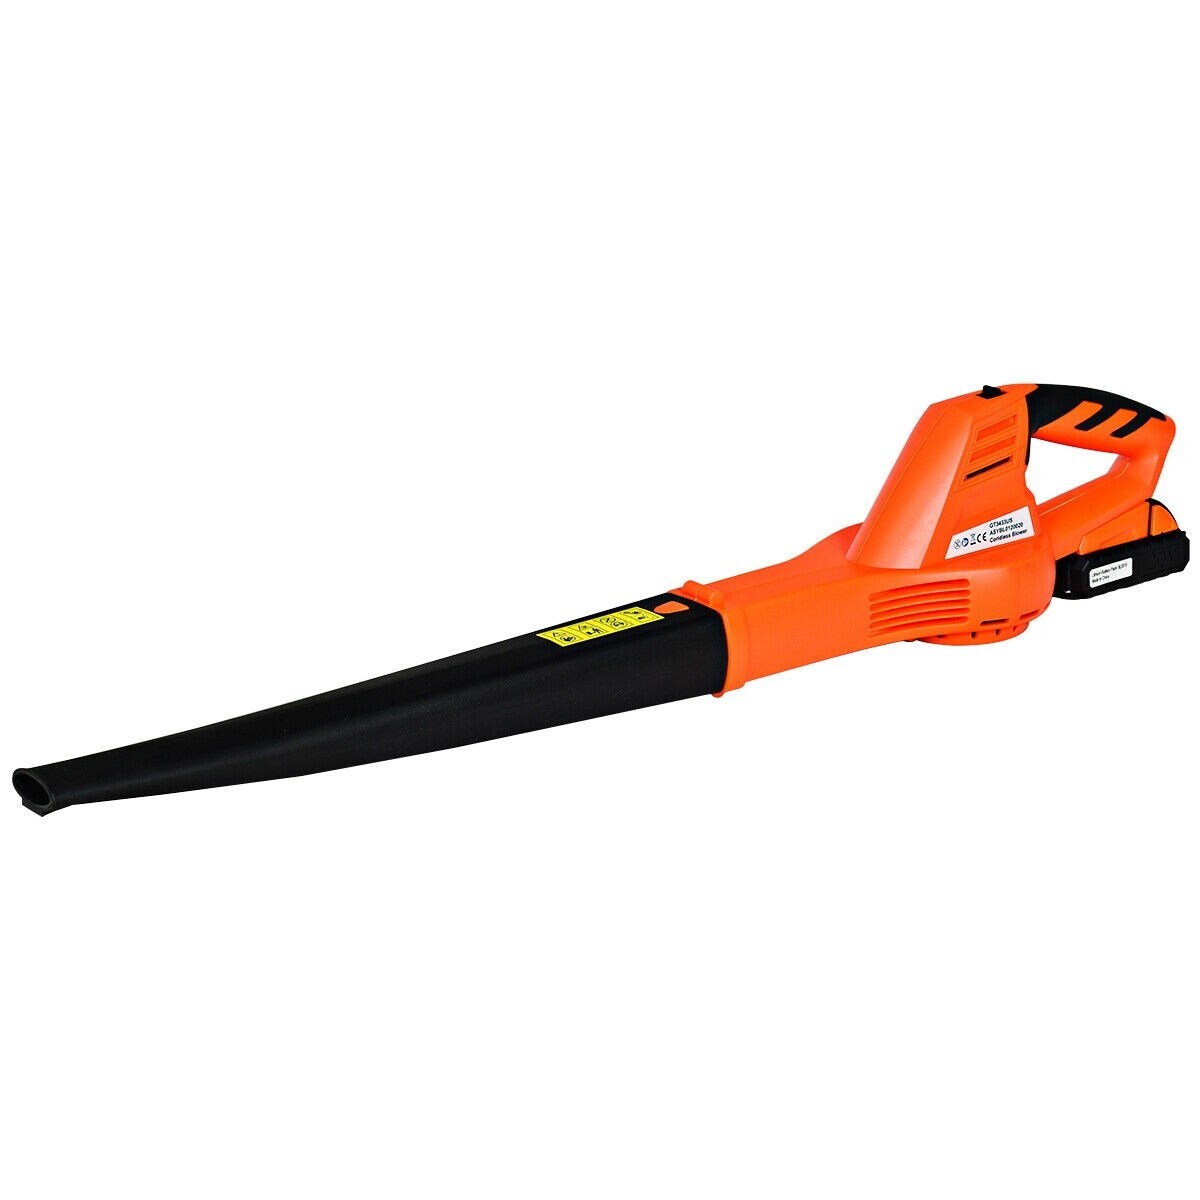 https://ak1.ostkcdn.com/images/products/is/images/direct/597aab0eb9cc0ff871f095c634b7ea58c4dcfc36/Cordless-Leaf-Blower-Sweeper-with-130-MPH-Blower-Battery-%26-Charger.jpg